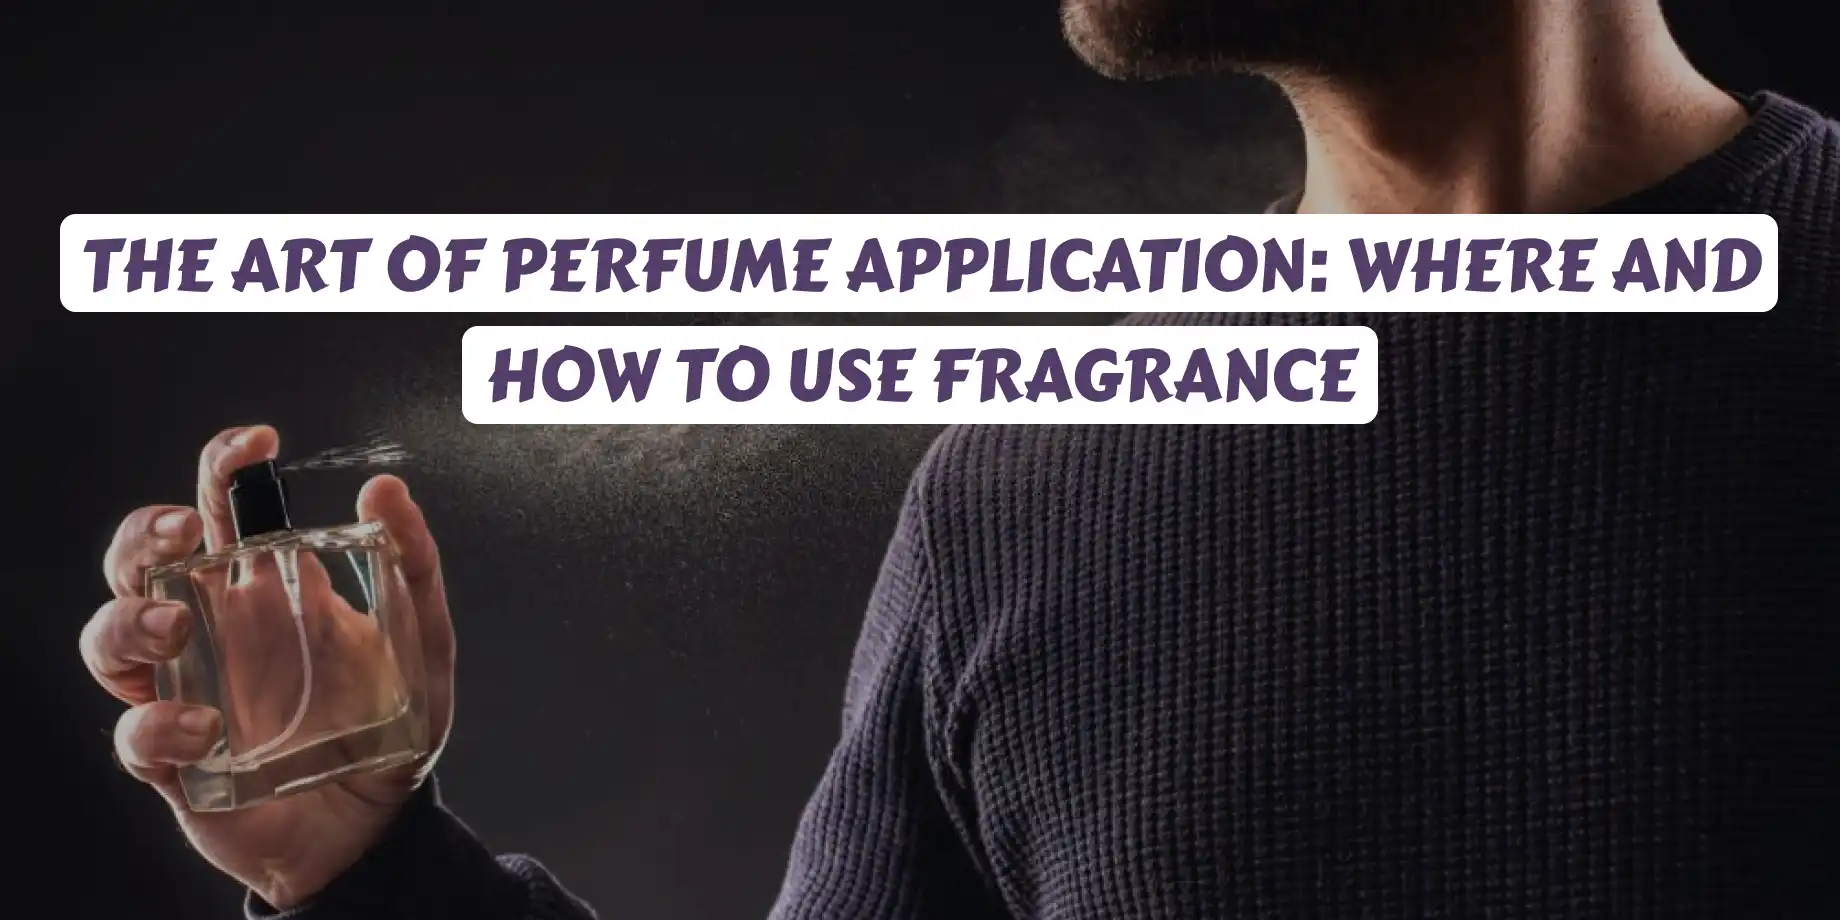 The art of perfume application: where and how to use fragrance